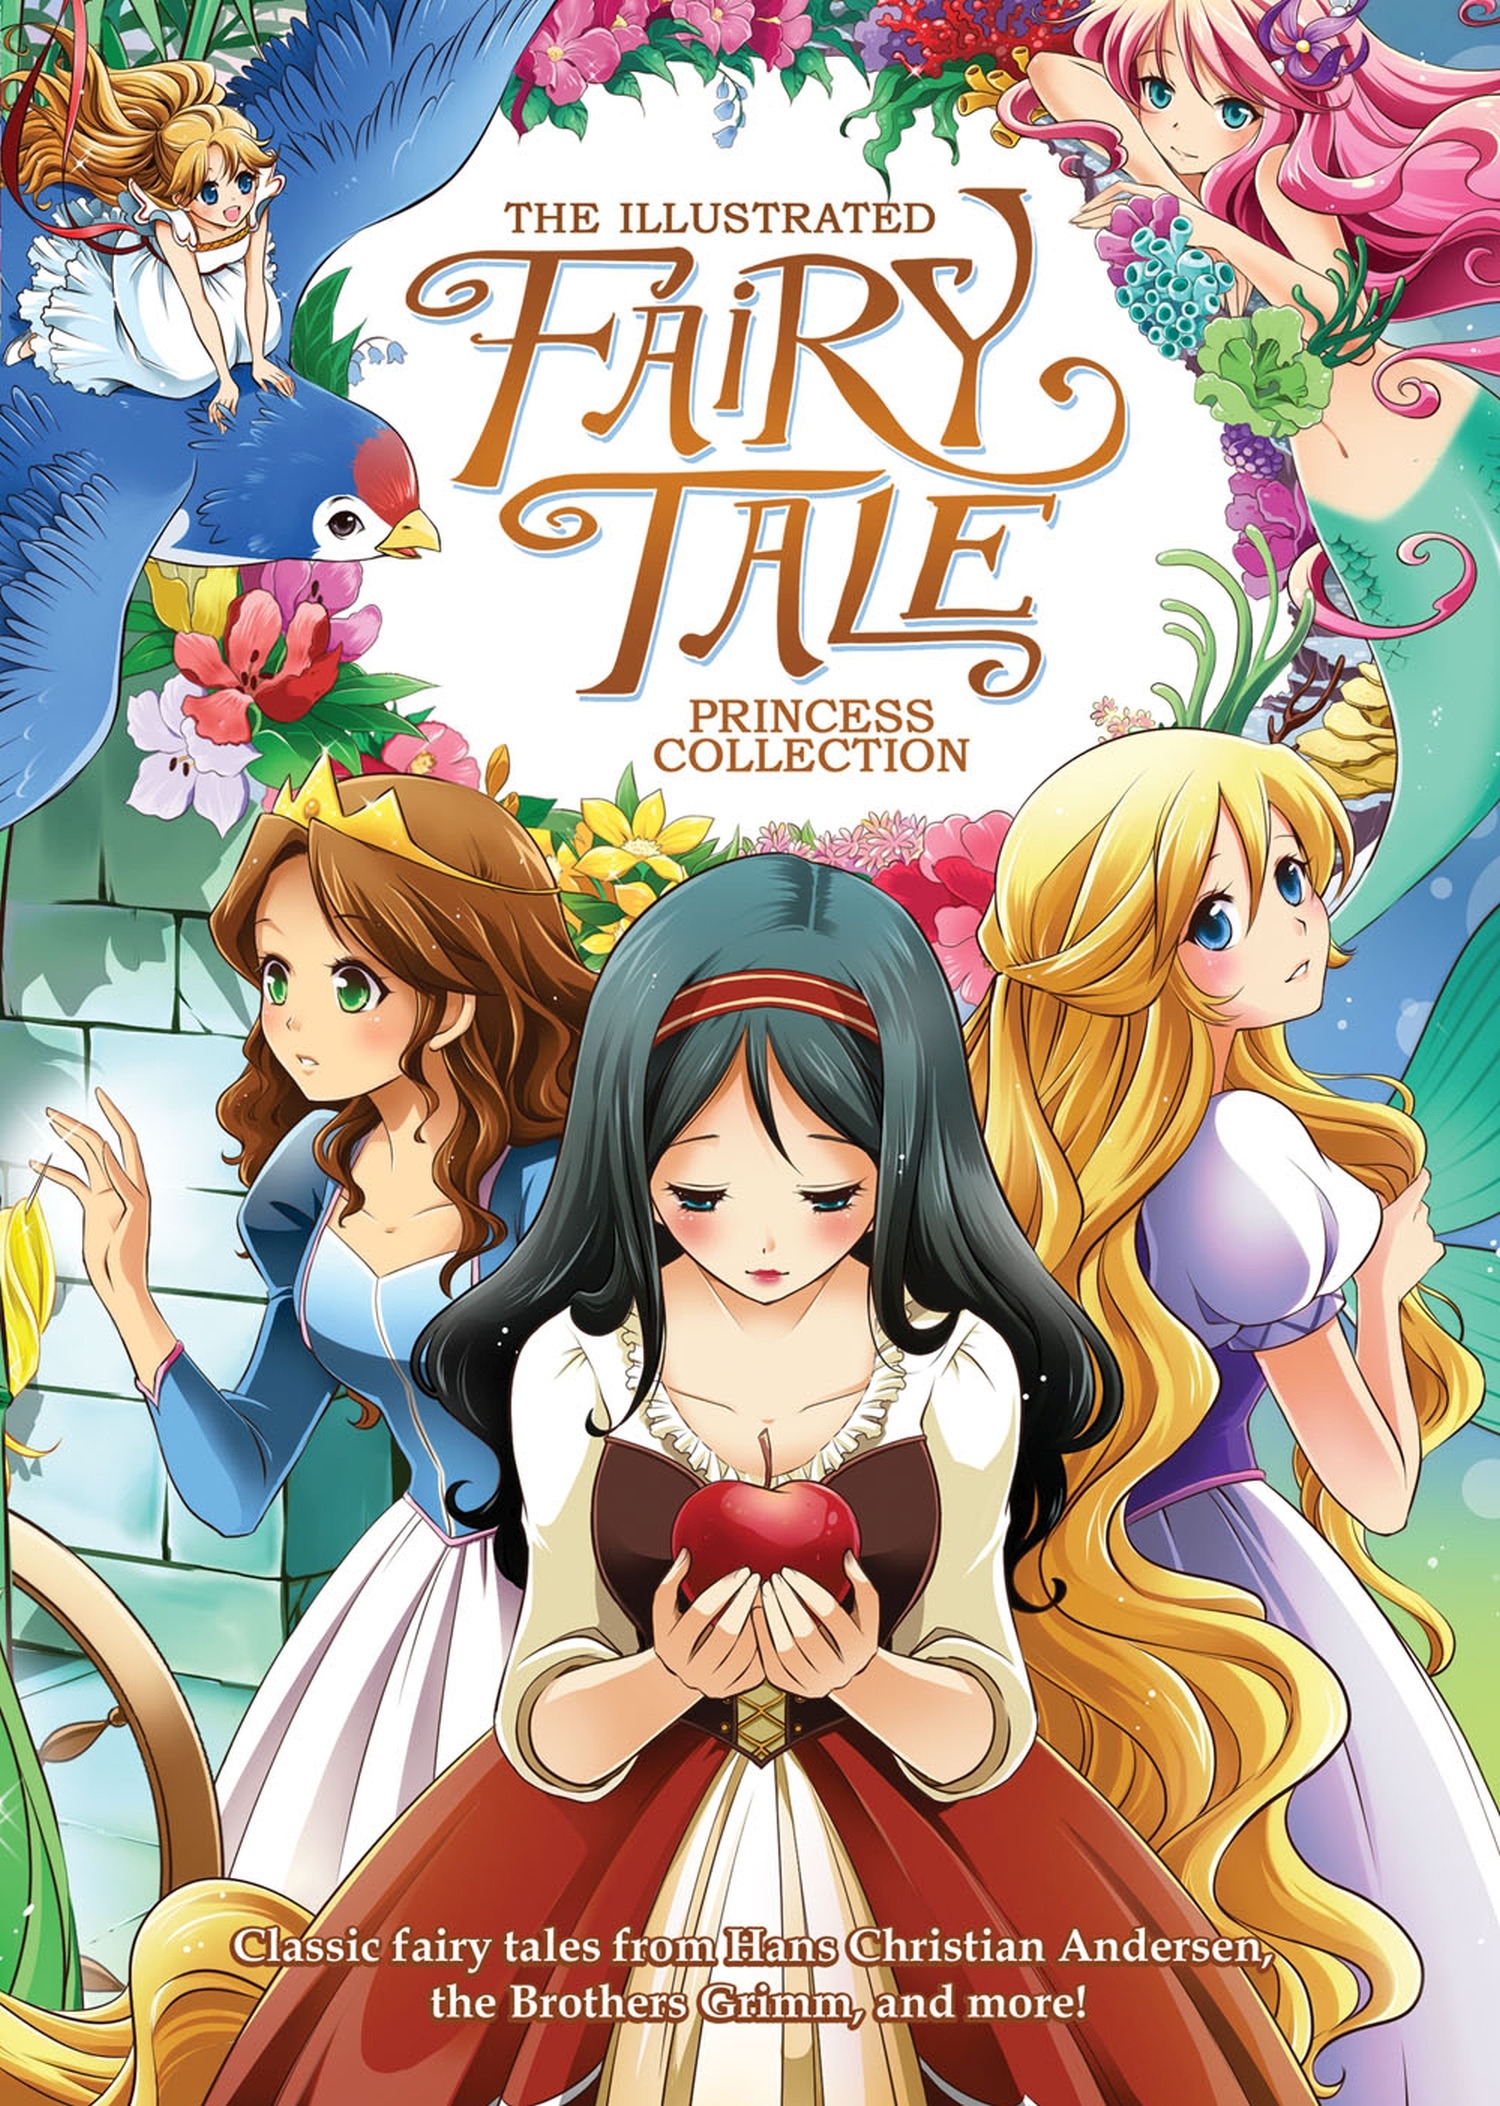 The Illustrated Fairy Tale Princess Collection (Illustrated Novel) by Shiei  - Penguin Books Australia